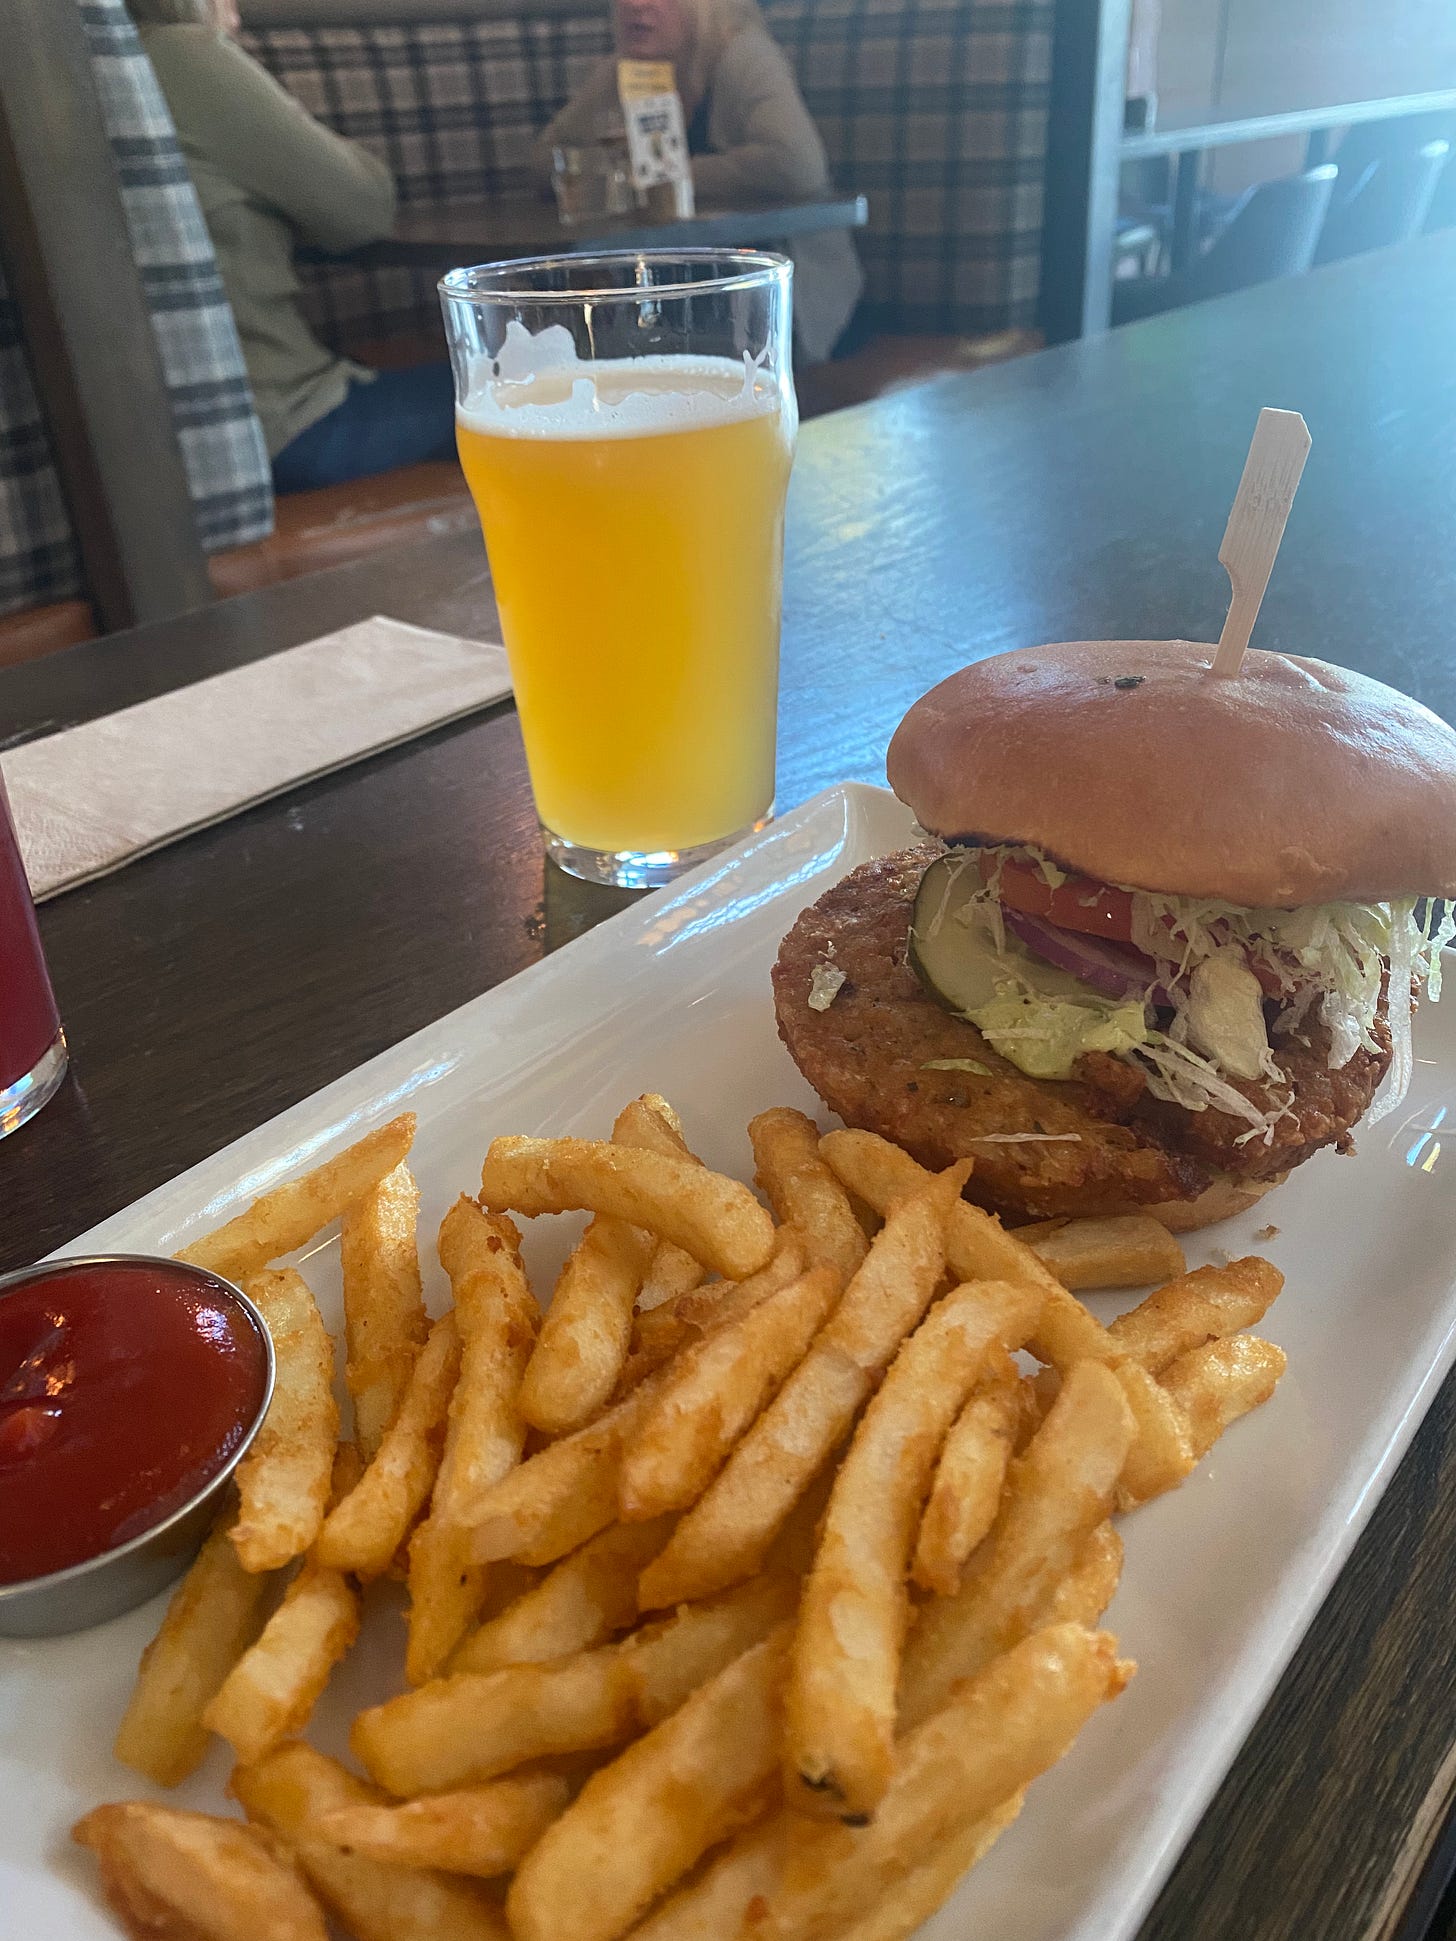 A rectangular plate with a veggie burger and beer-battered fries, with a side of ketchup. A glass of beer is in the background.